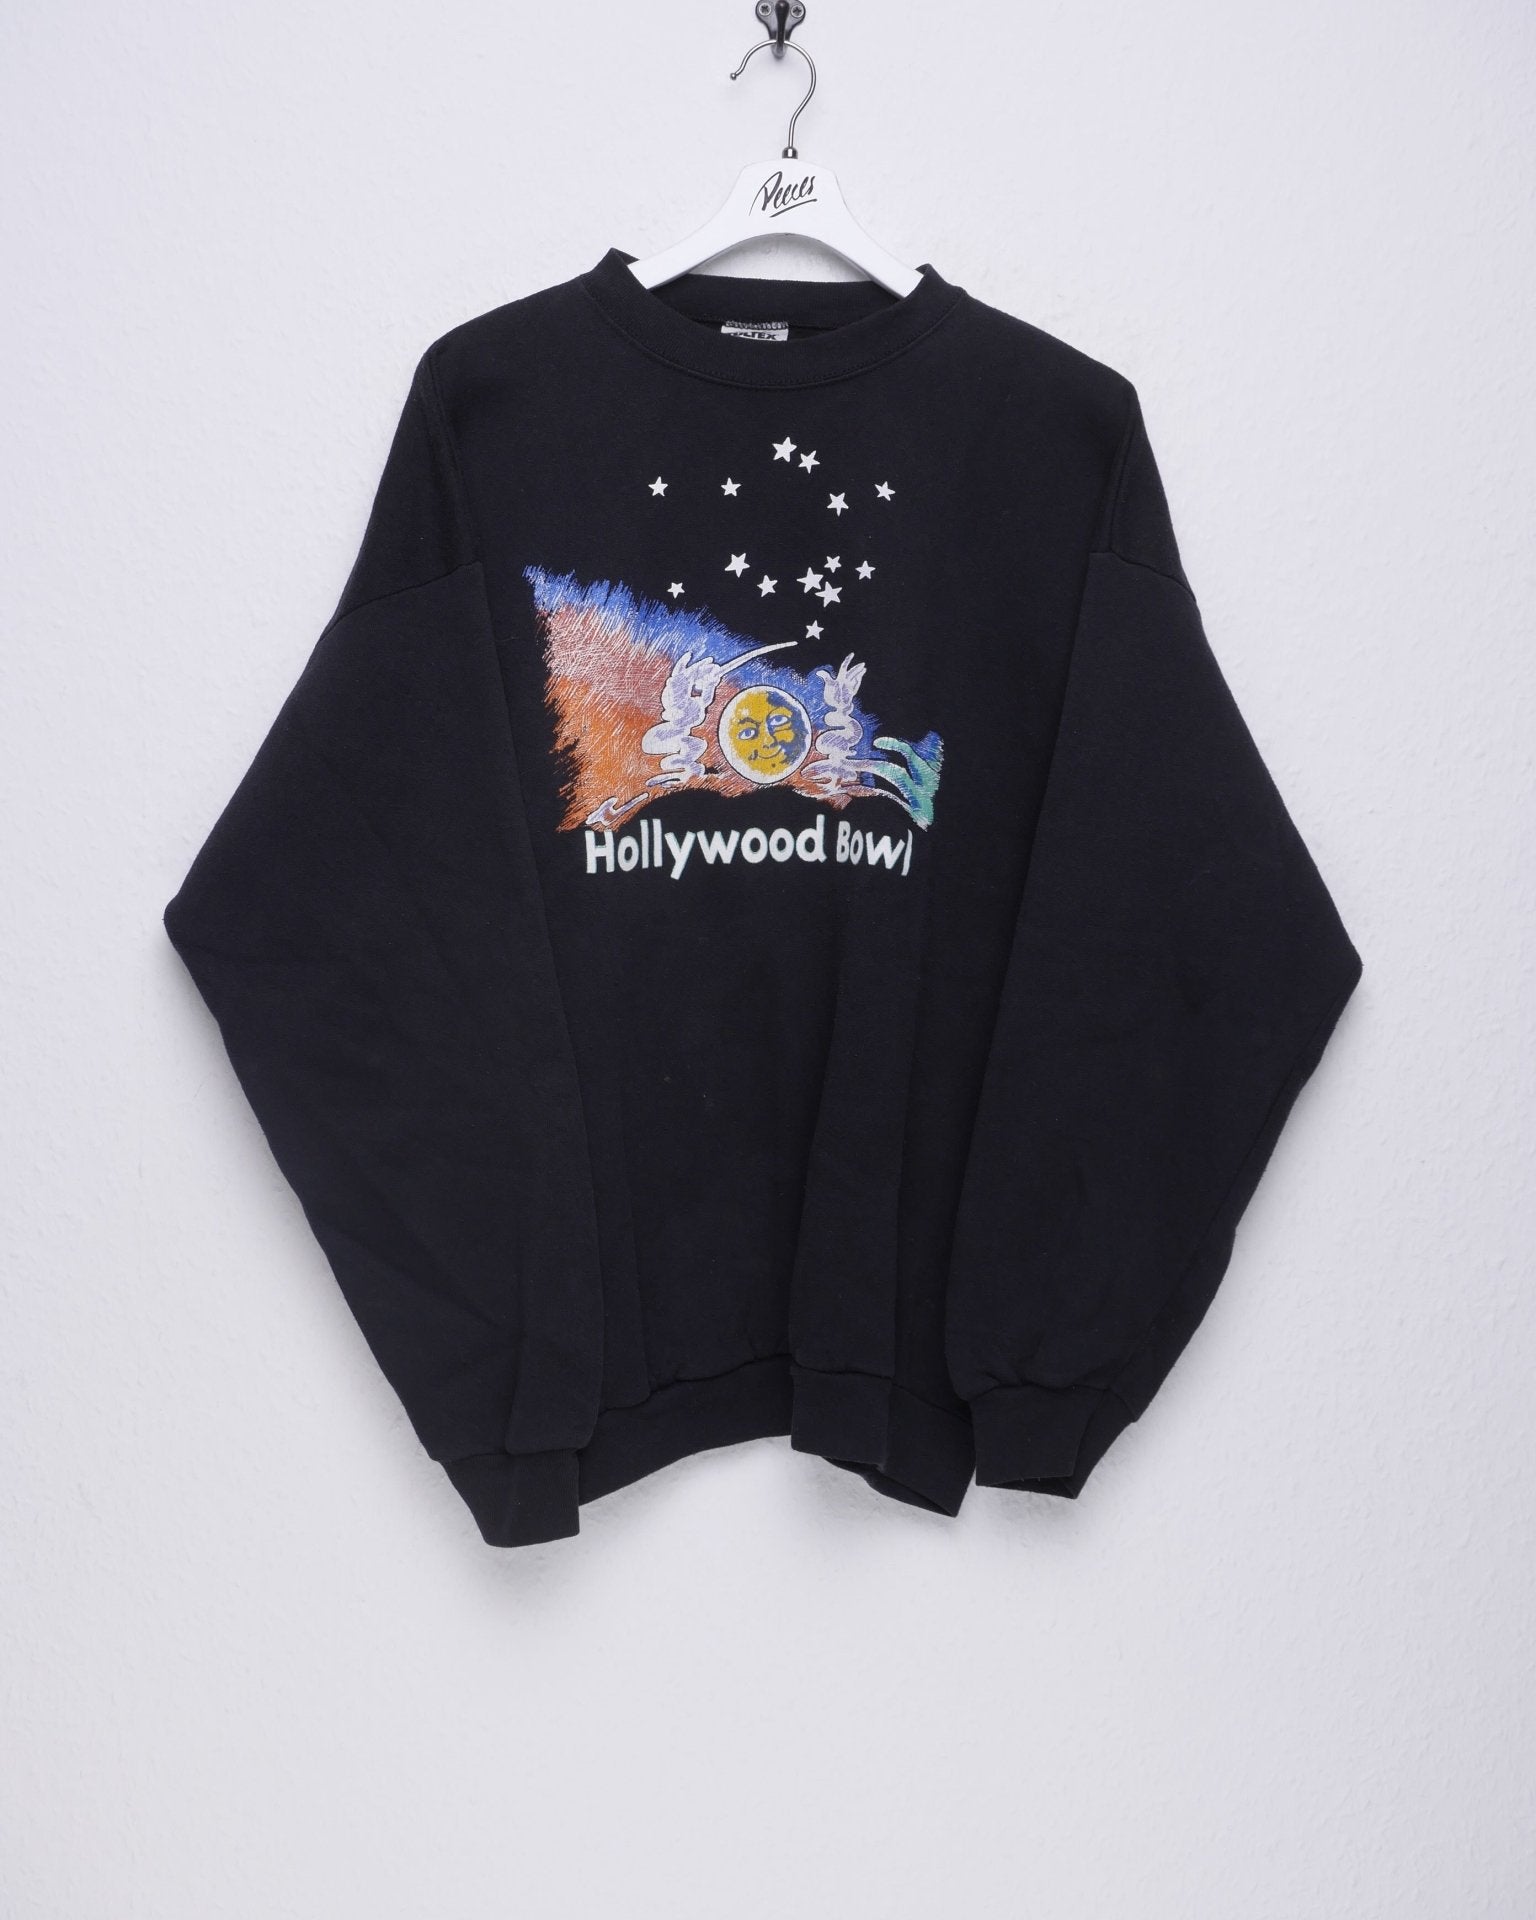 Hollywood Bowl printed Graphic black Sweater - Peeces